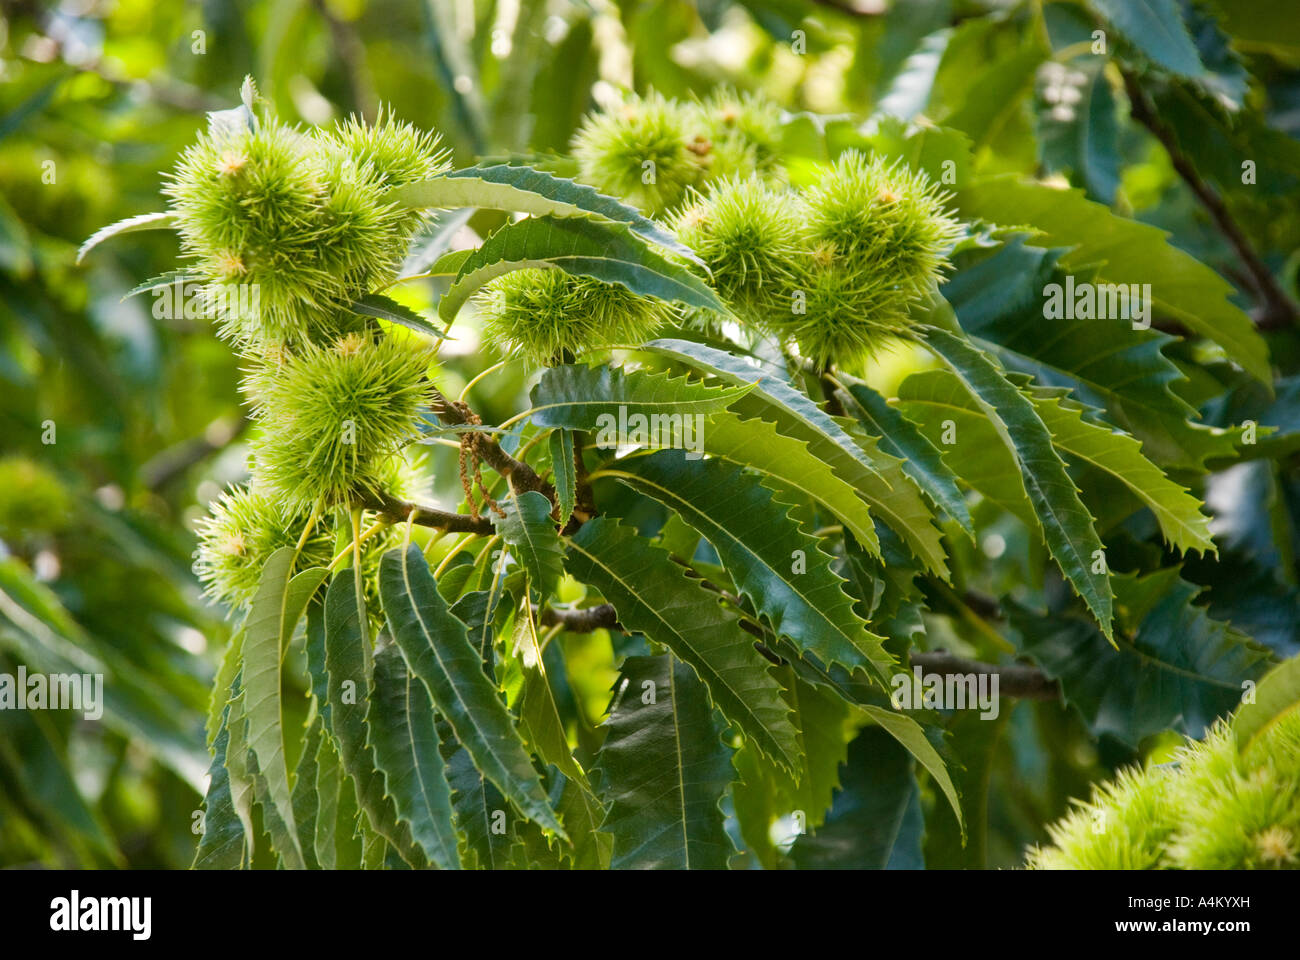 Chestnuts ripening on a tree Stock Photo